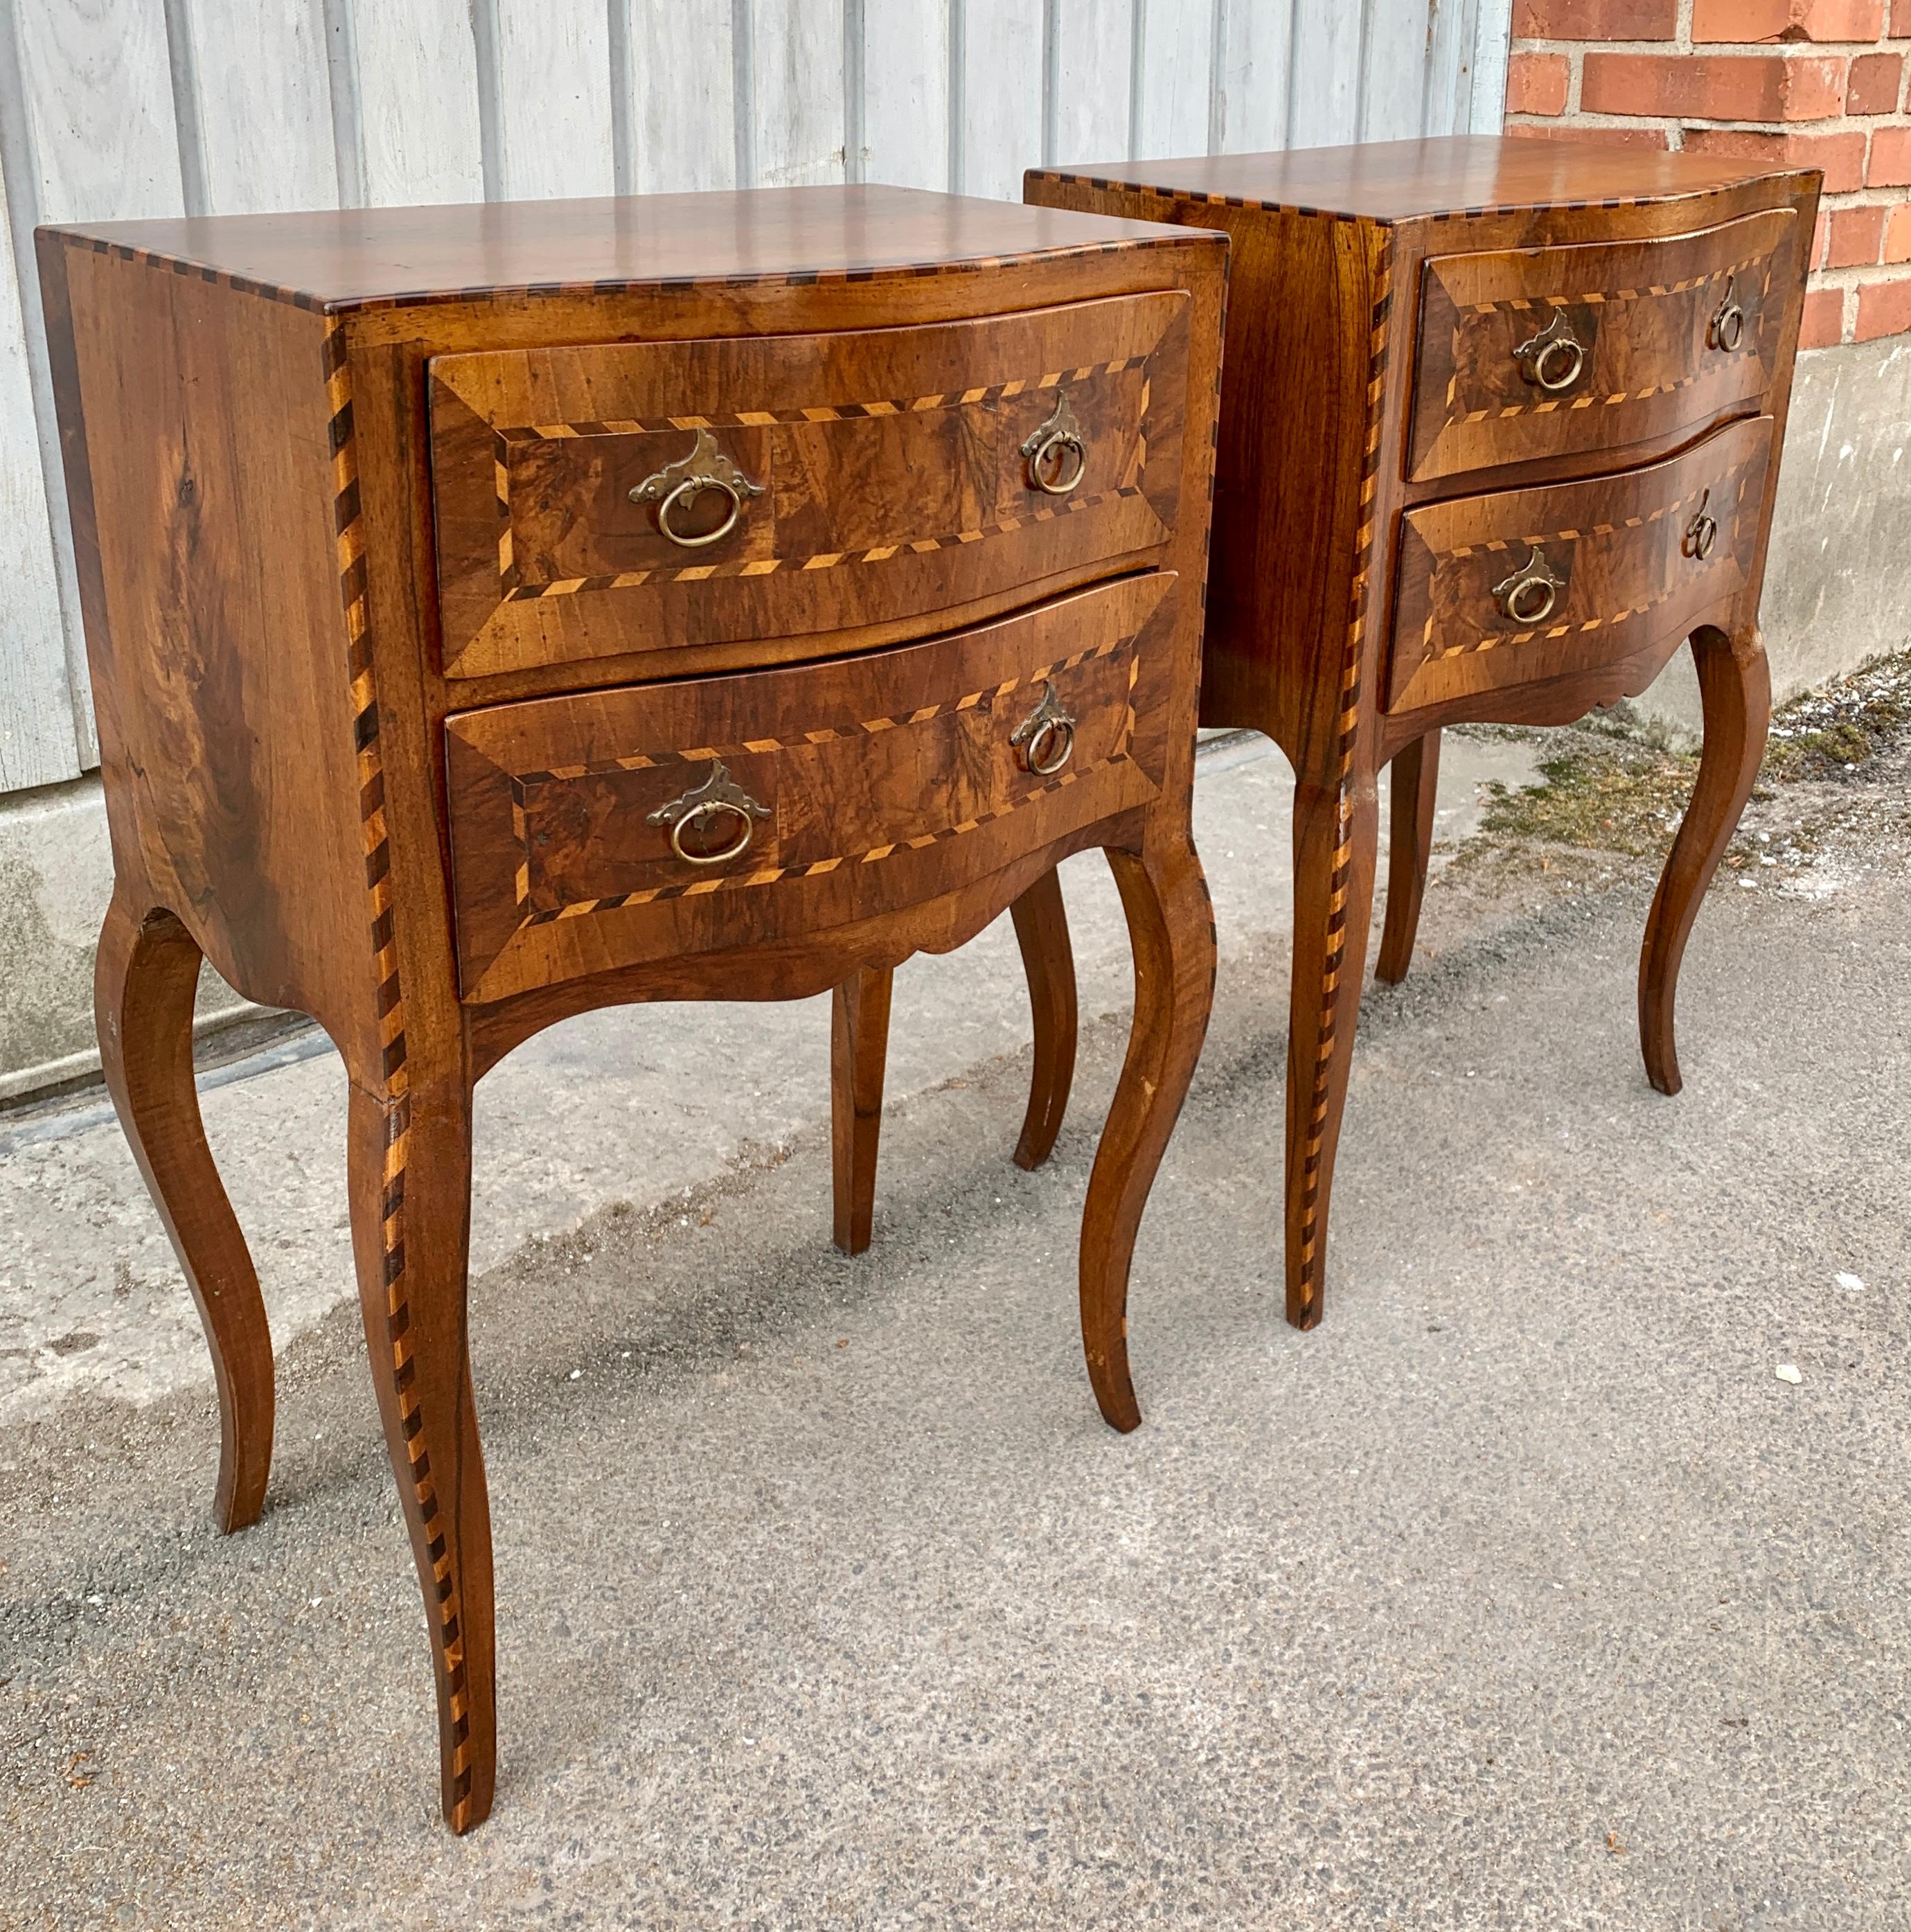 Hand-Crafted Pair of Italian Antique Nightstands in Walnut and Brass Hardware